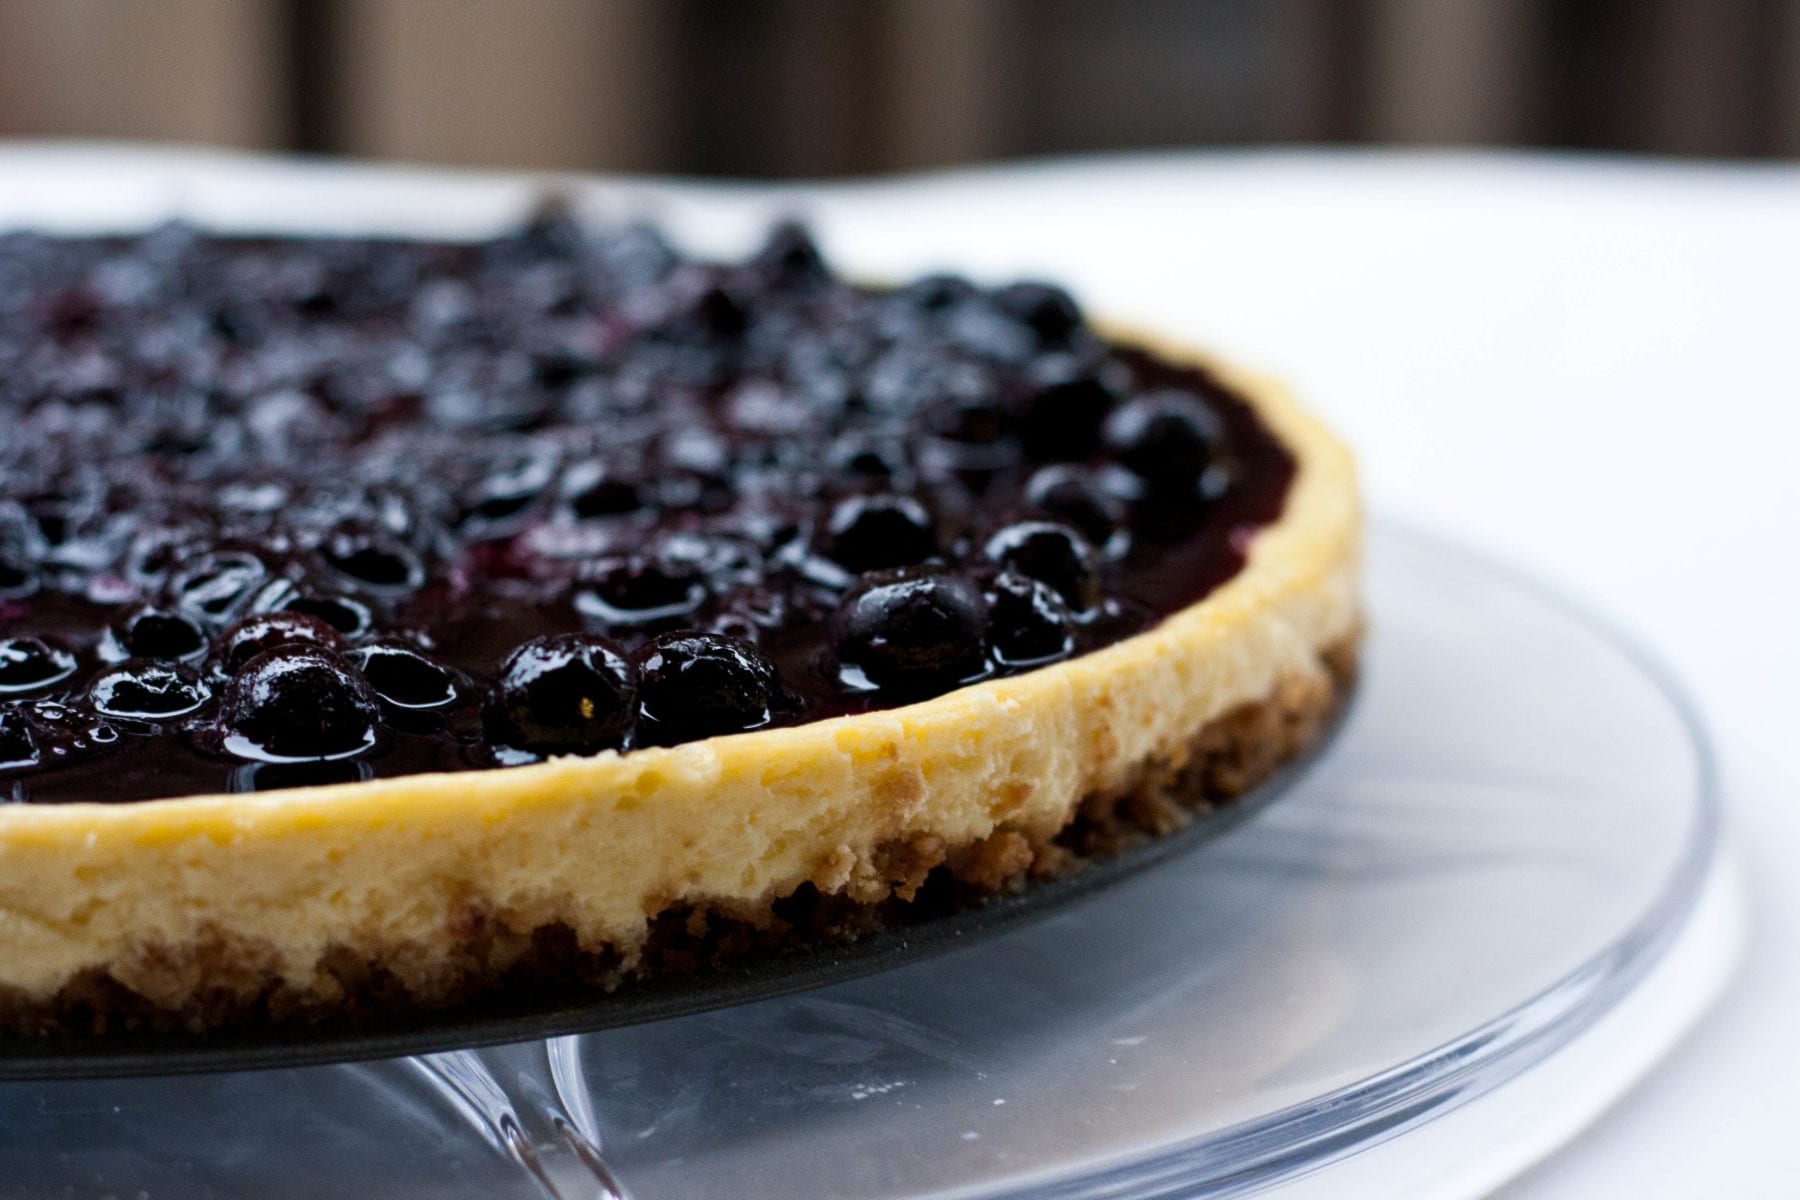 Crème Fraiche Cheesecake with Blueberry Topping